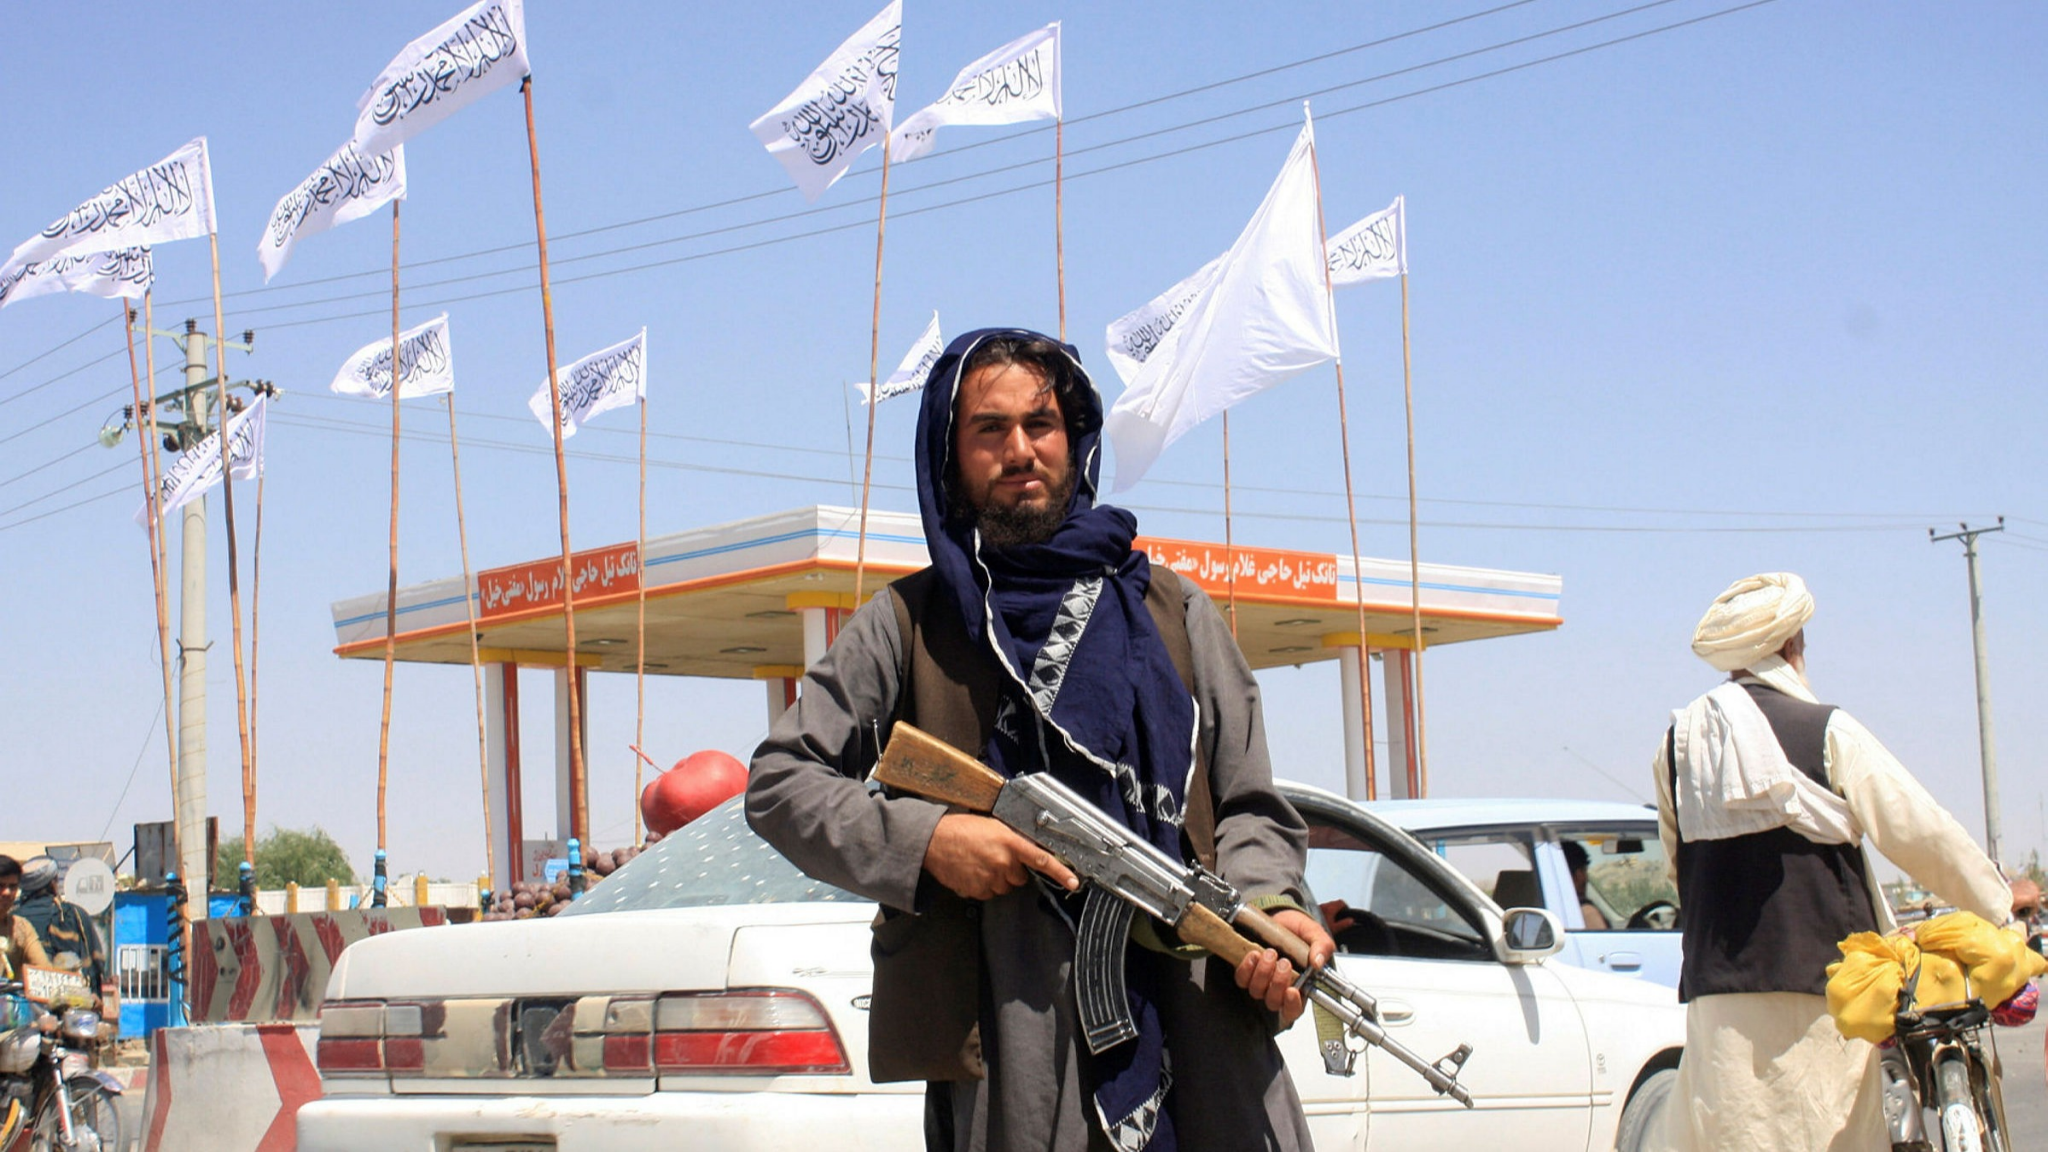 A man in hooded Middle-East clothing stands holding a rifle in front of a background of white flags with symbols, blowing in a light wind at a gas station.